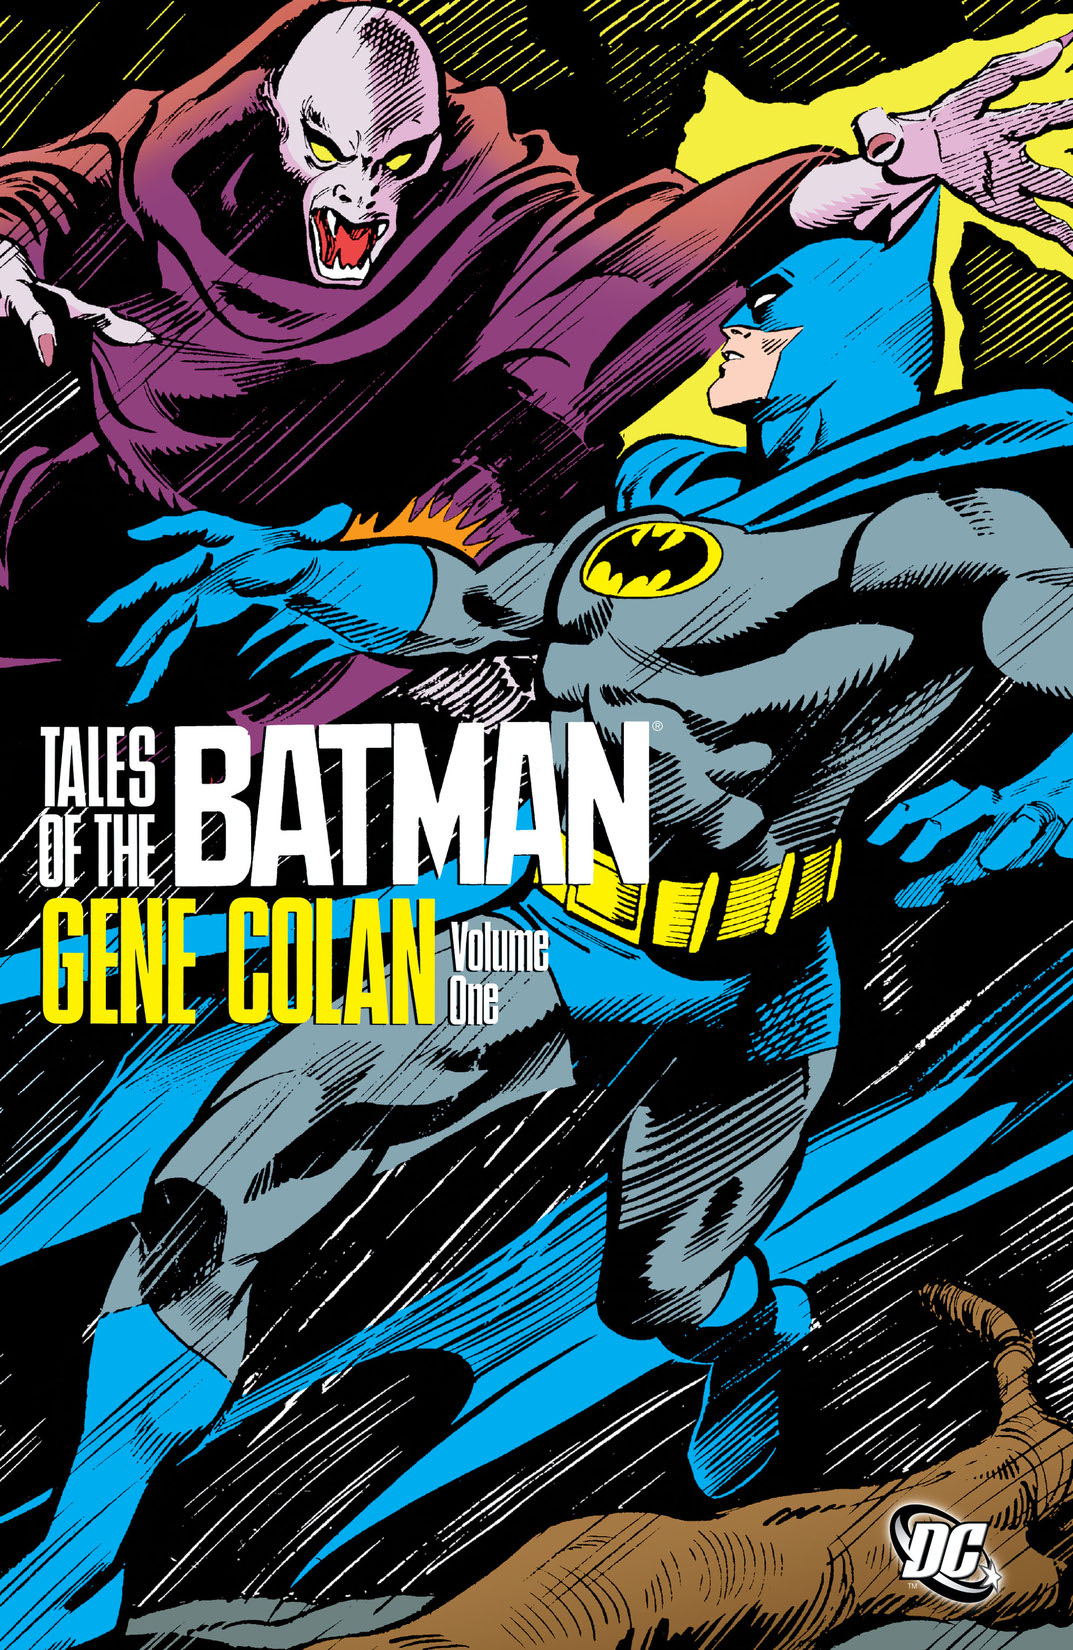 Tales of the Batman - Gene Colan Vol. 1 preview images